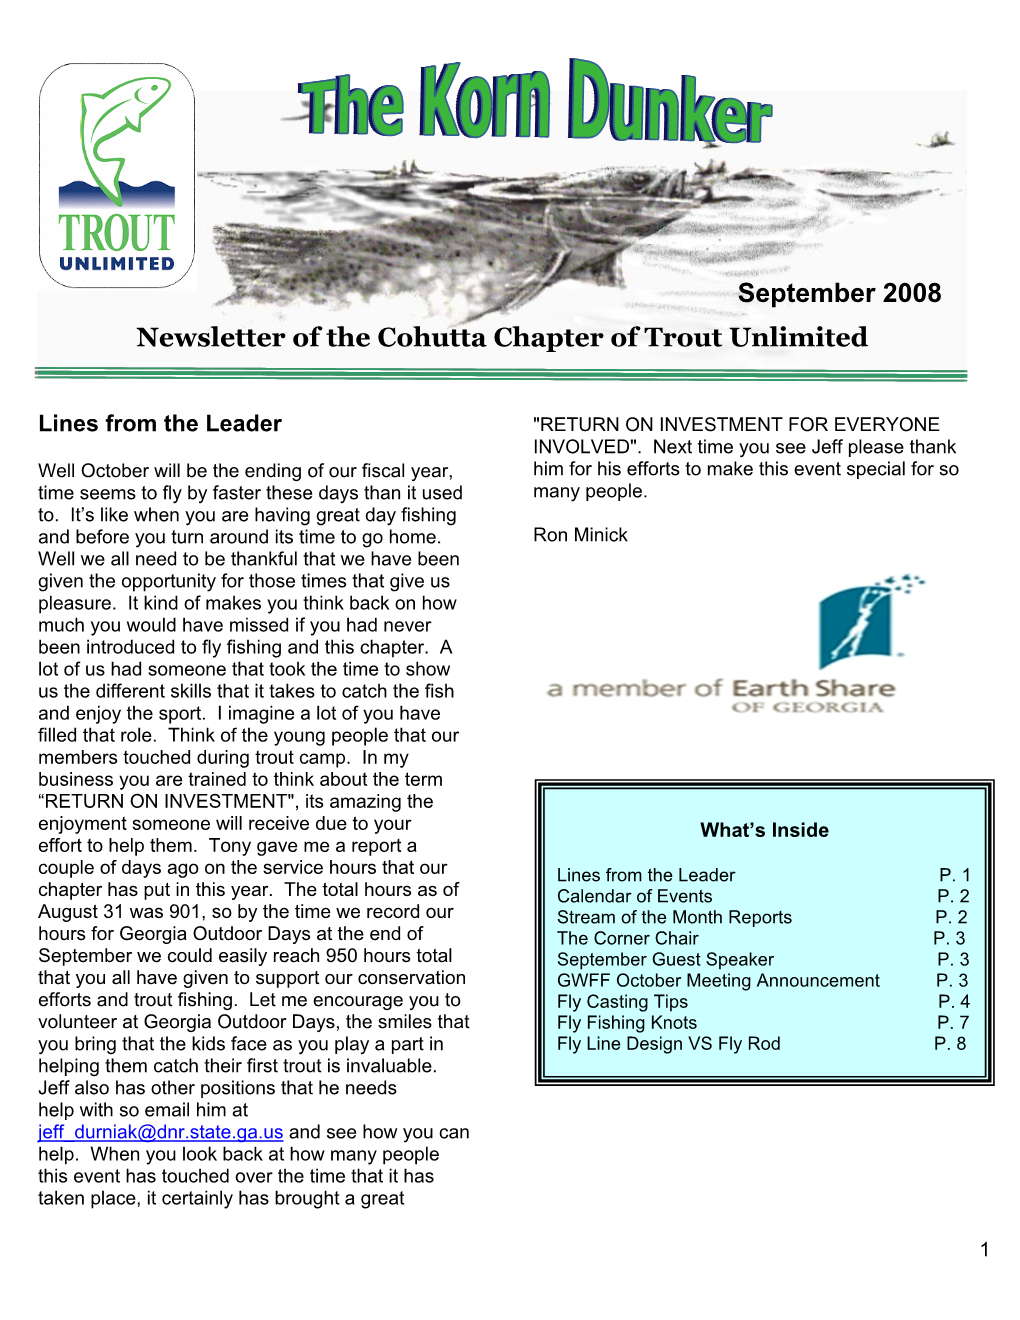 Newsletter of the Cohutta Chapter of Trout Unlimited September 2008